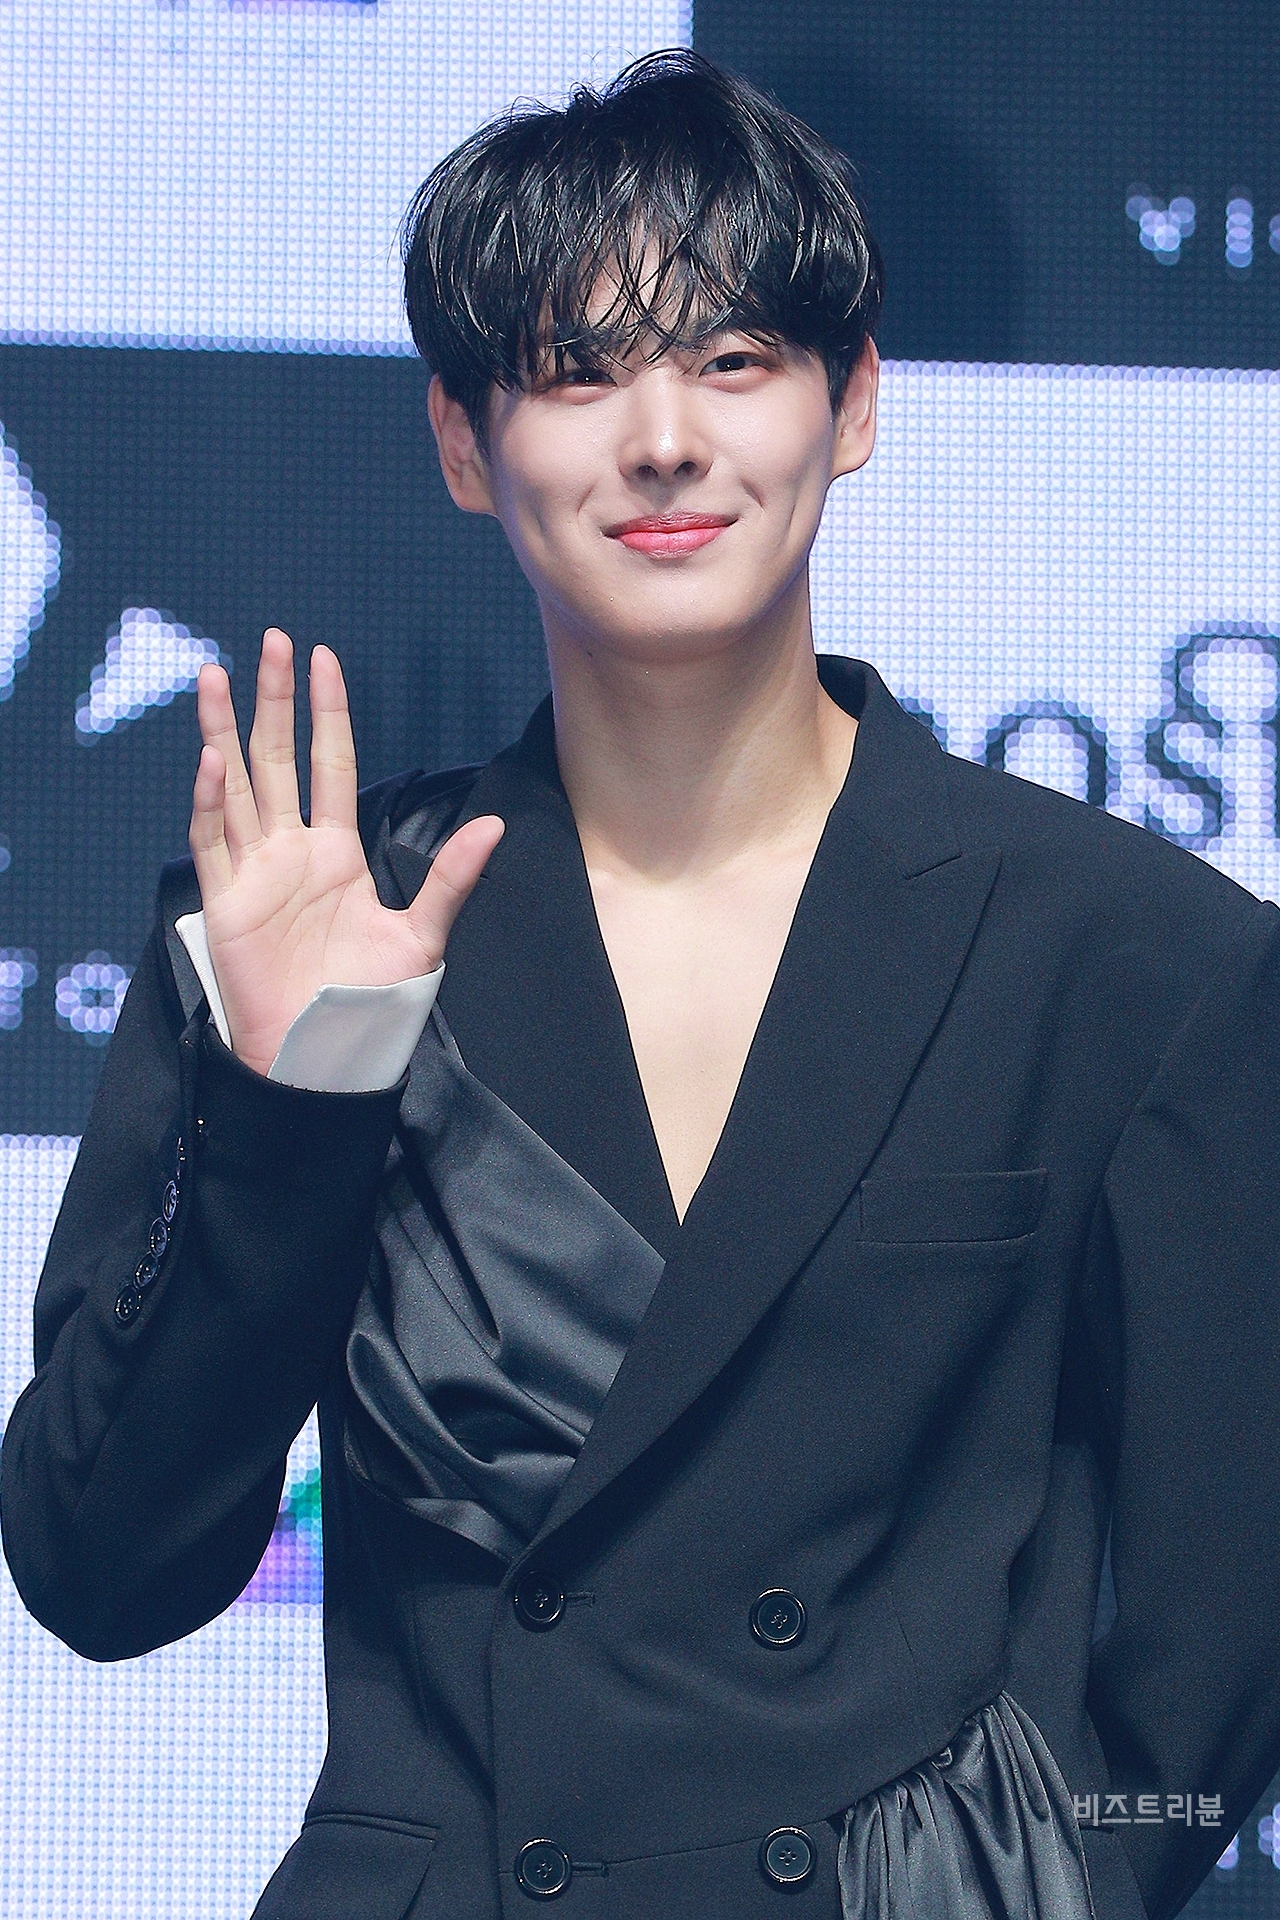 victon-choi-byung-chan-confirmed-to-join-cast-of-upcoming-kbs-drama-affection